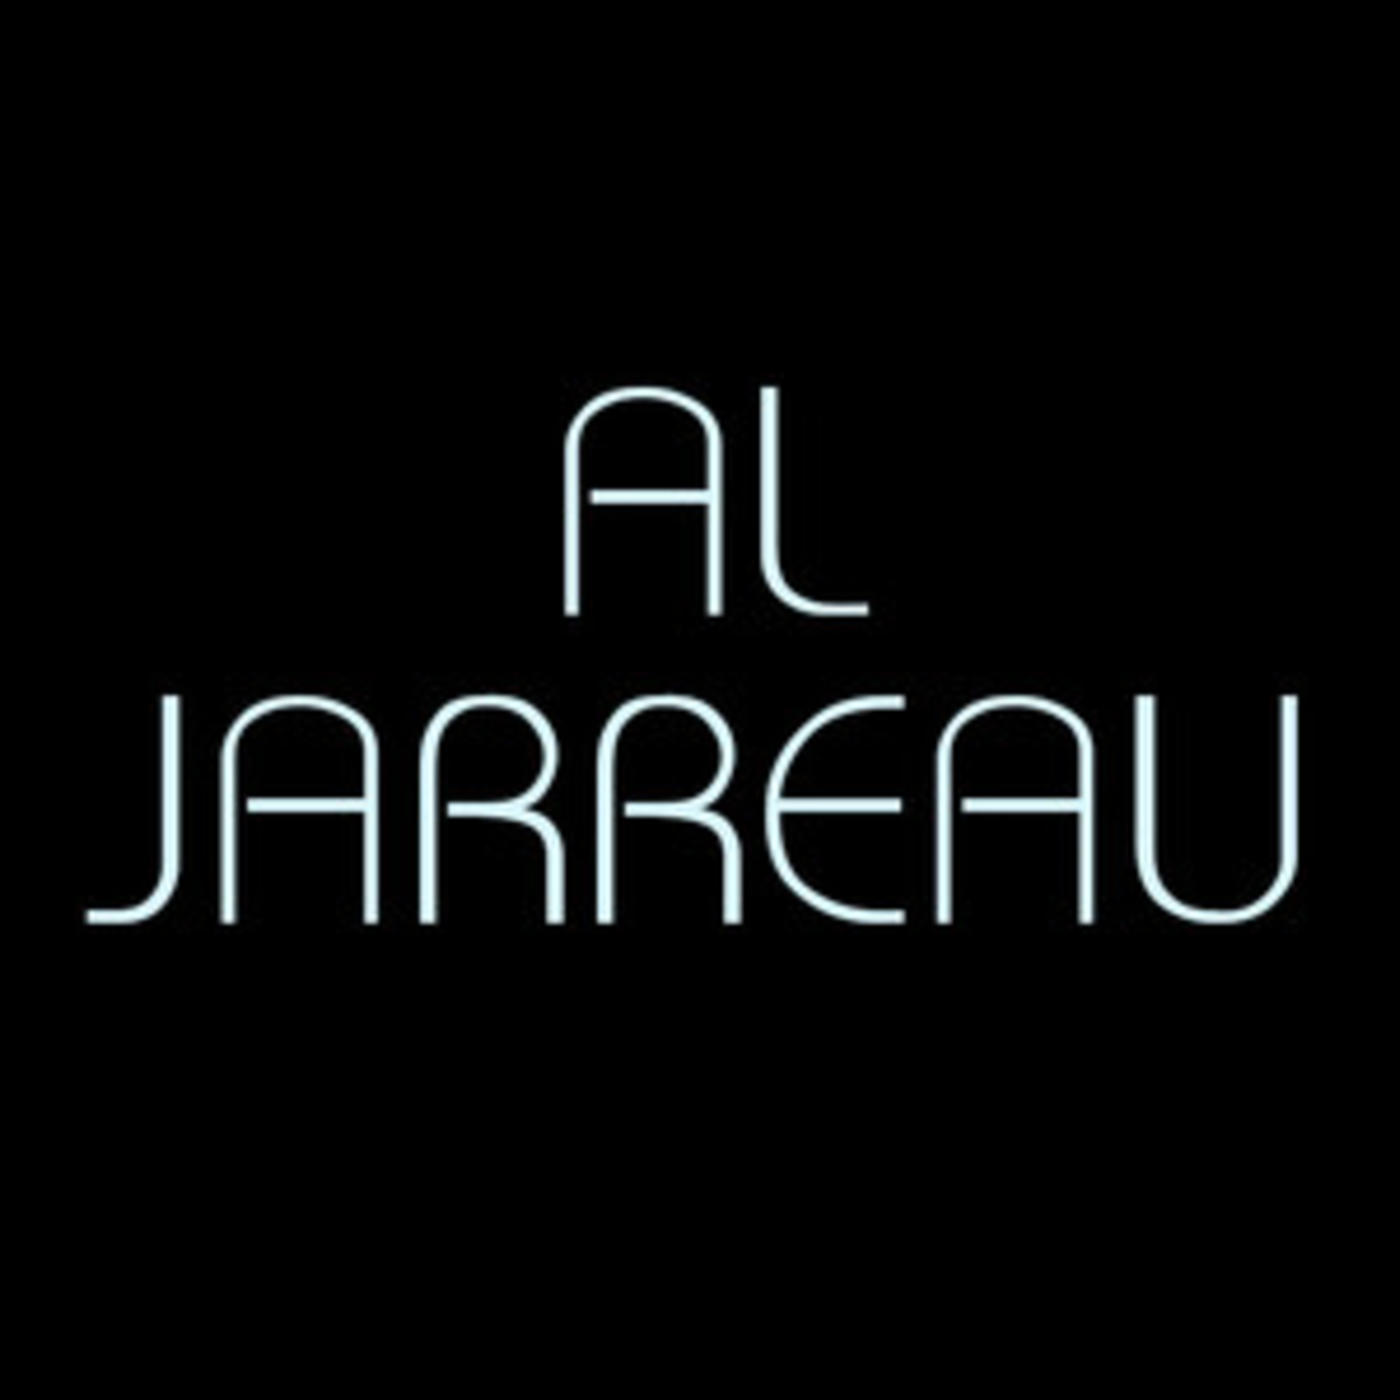 Al Jarreau - Official Playlist - Mornin', We're In This Love Together, After All, Roof Garden